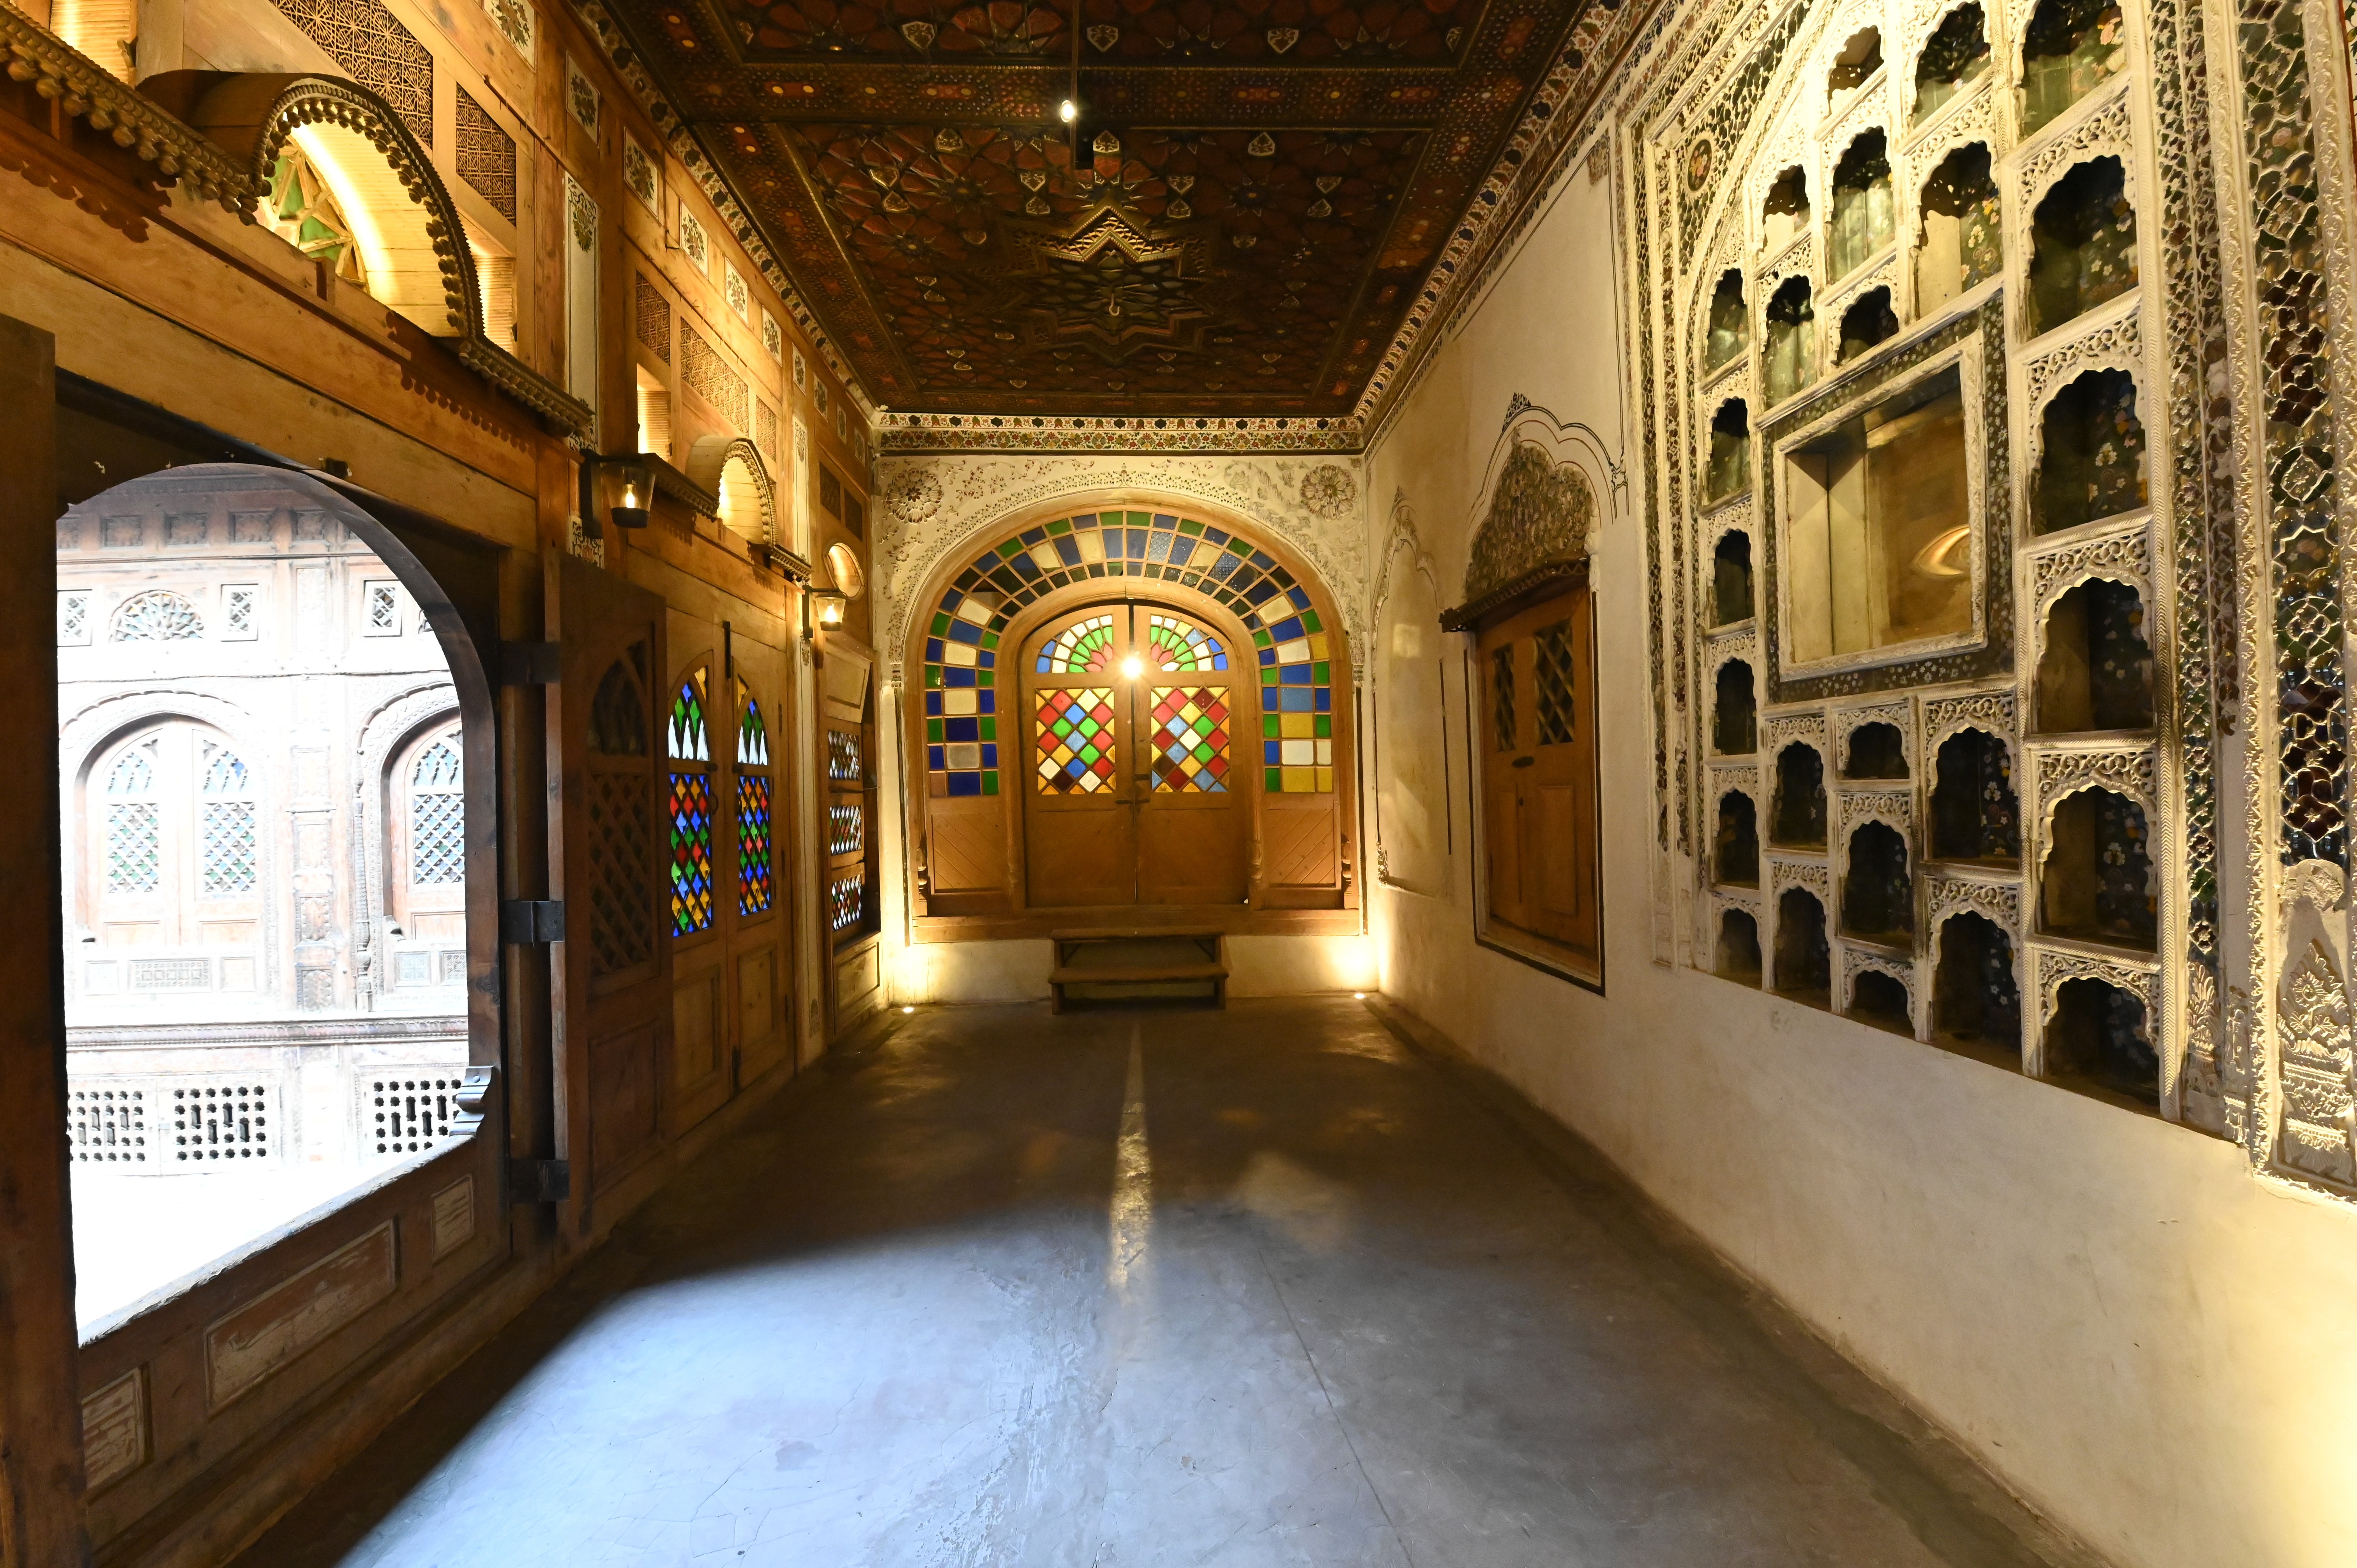 The beautiful interior view of a house located in Sethi Mohalla, The Sethi Mohallah is famous for its Central-Asian style homes